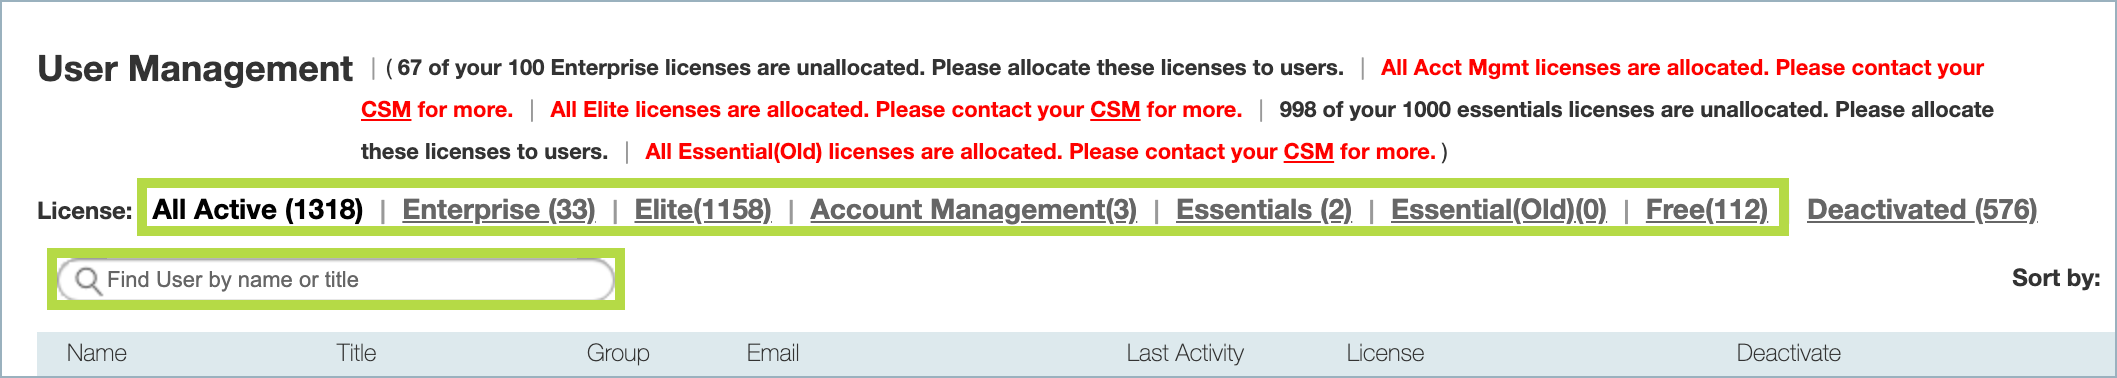 License Type Options.png